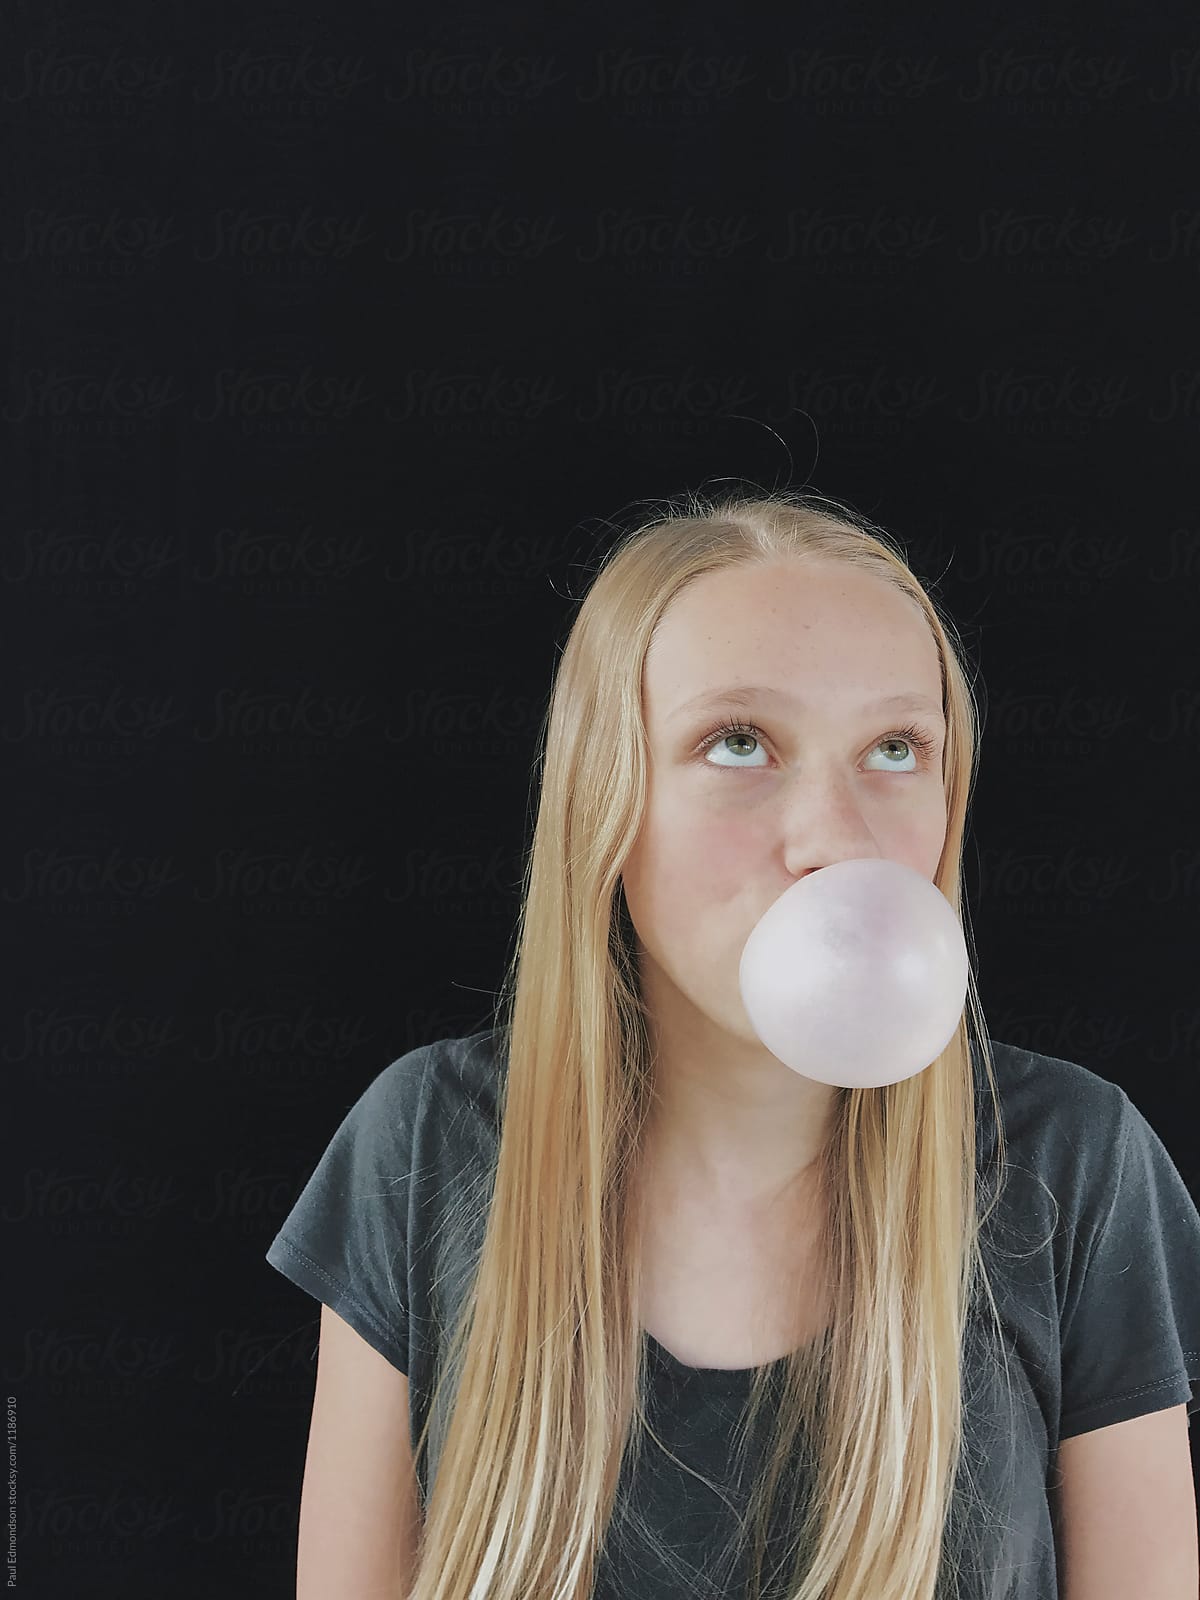 &amp;quot;Teenage Girl Blowing Bubble Gum Bubble&amp;quot; by Stocksy Contributor &amp;quot;Rialto ...